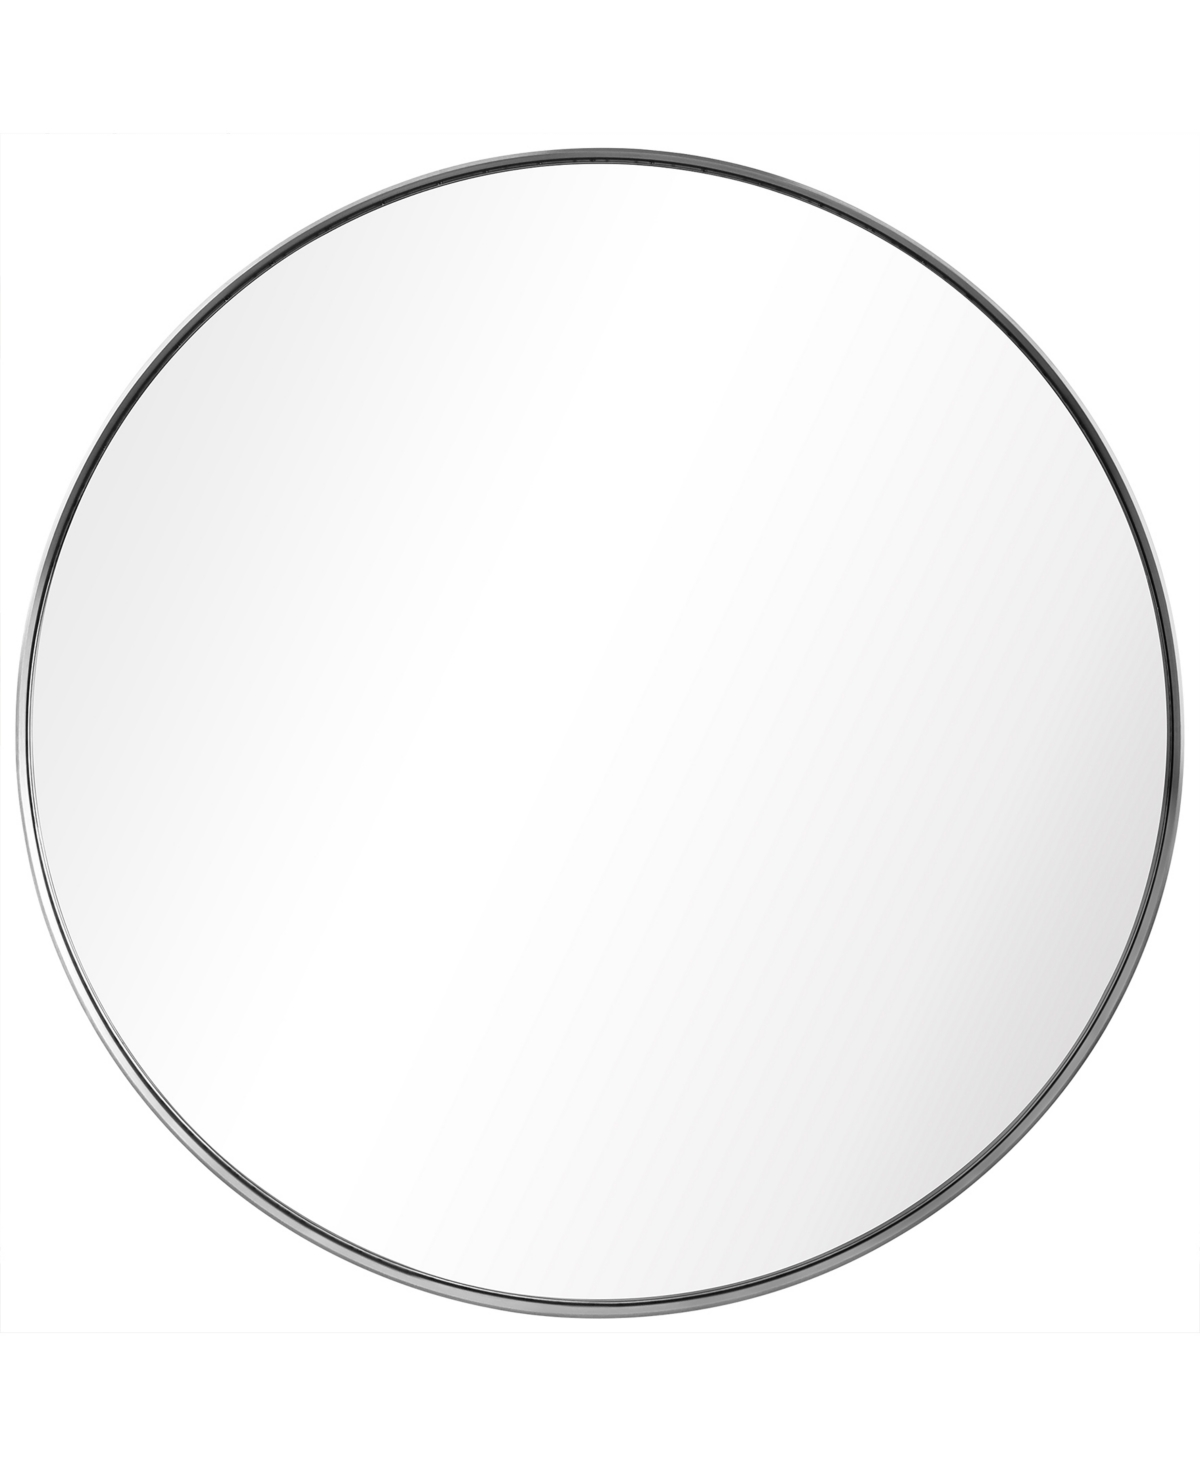 Ultra Brushed Stainless Steel Round Wall Mirror, 30" x 30" - Silver-Tone